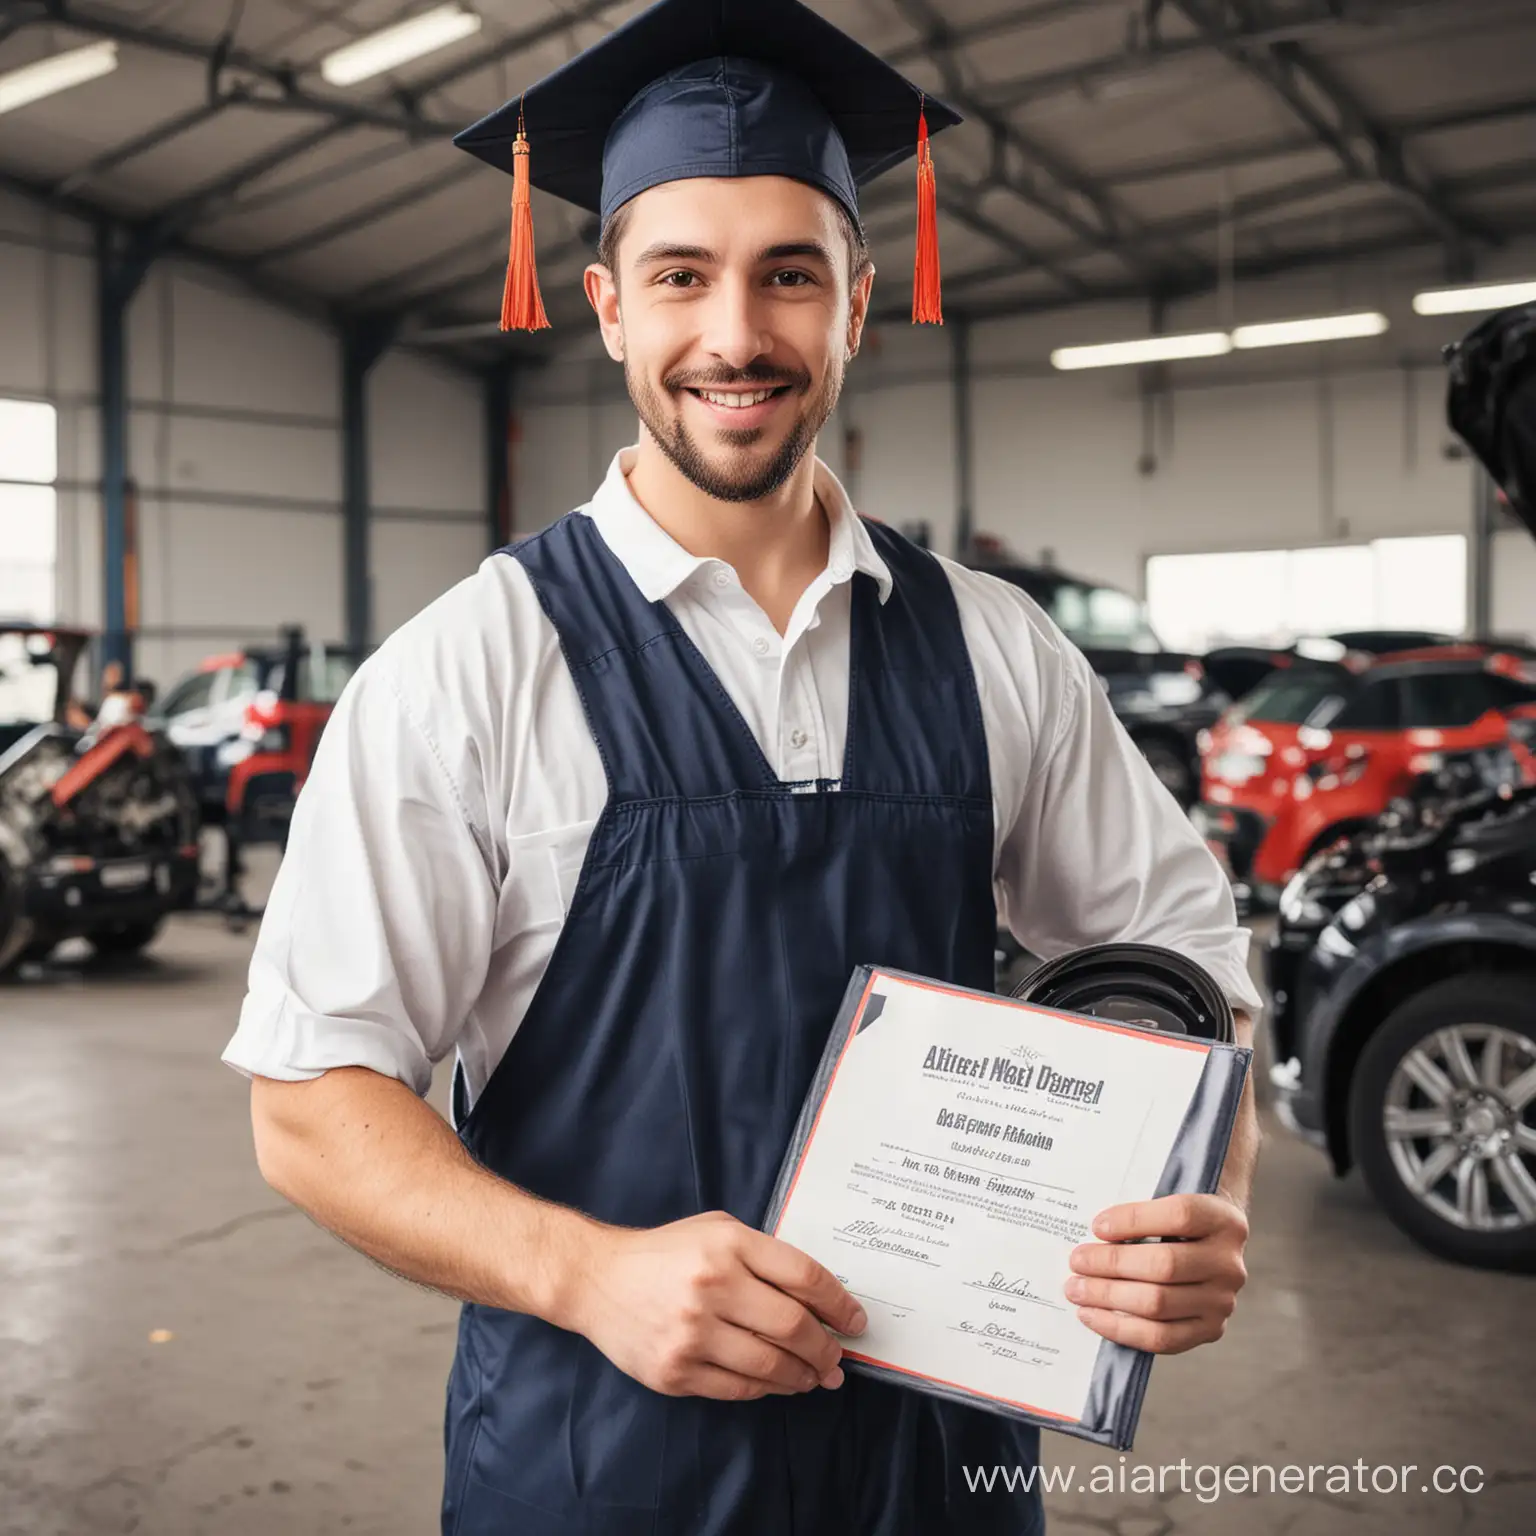 Certified-Auto-Mechanic-Proudly-Holds-Diploma